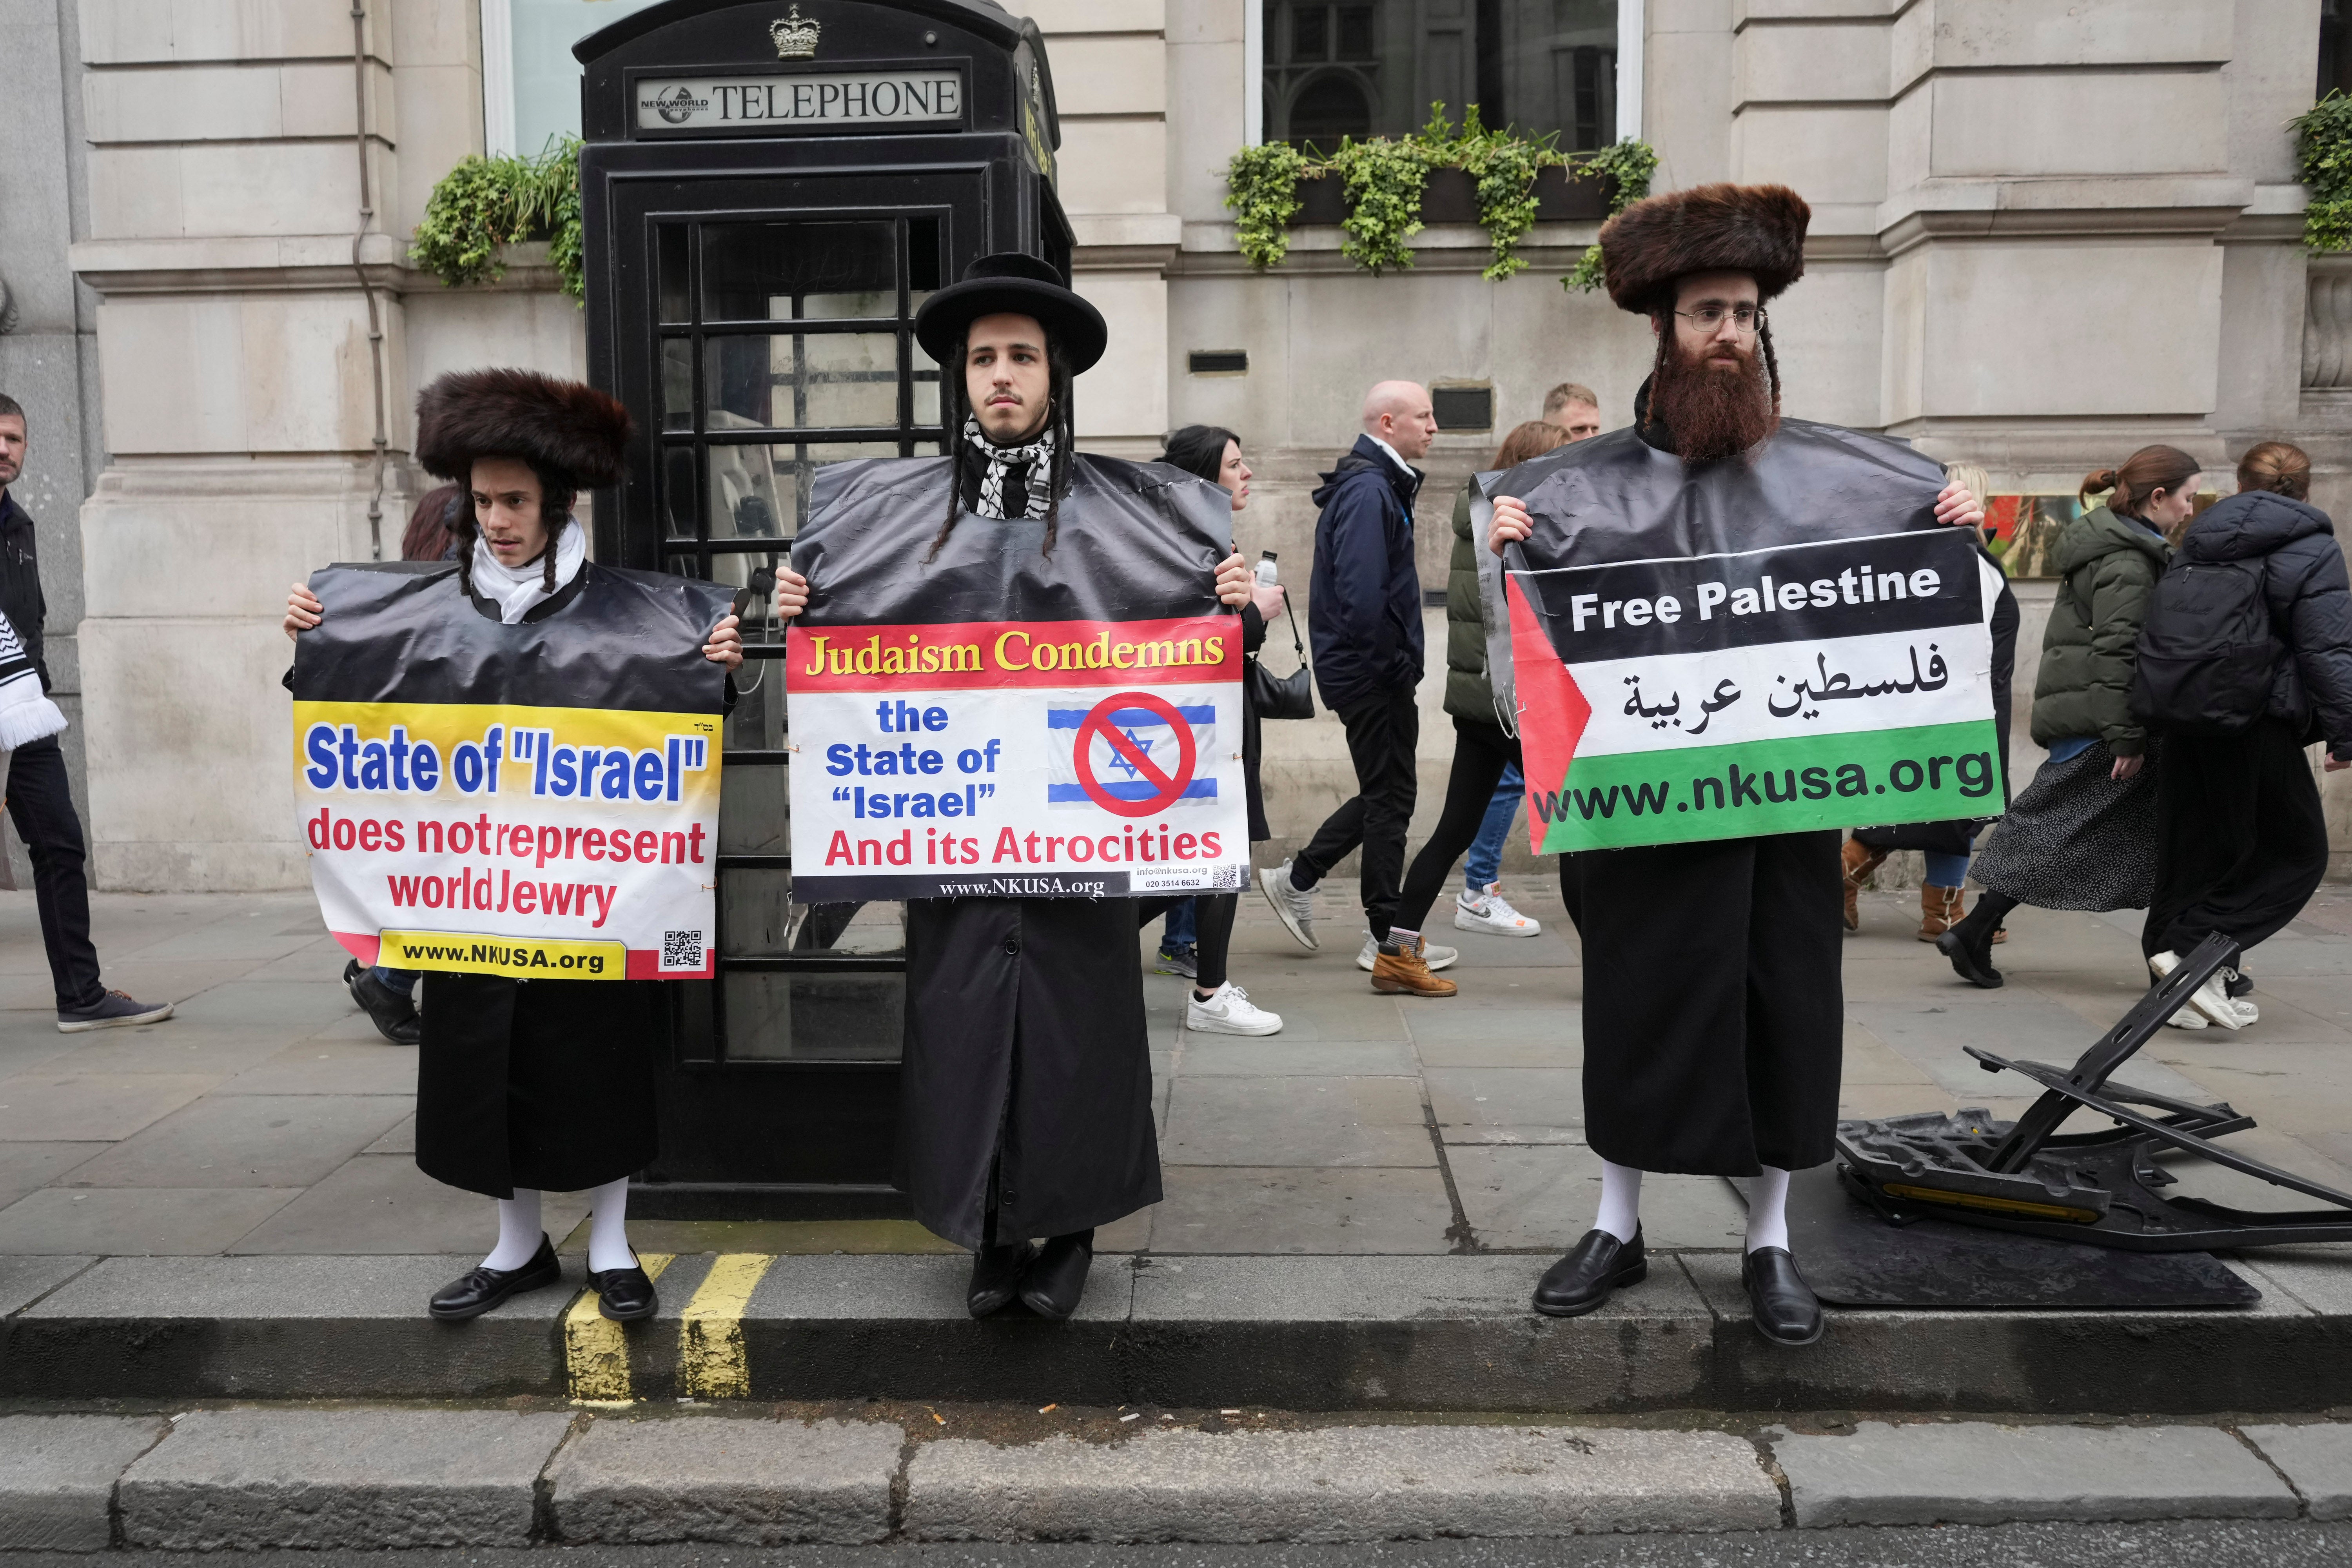 Three Jewish men who belong to the Neturei Karta sect holding placards reading “Judaism condemns the state of Israel”